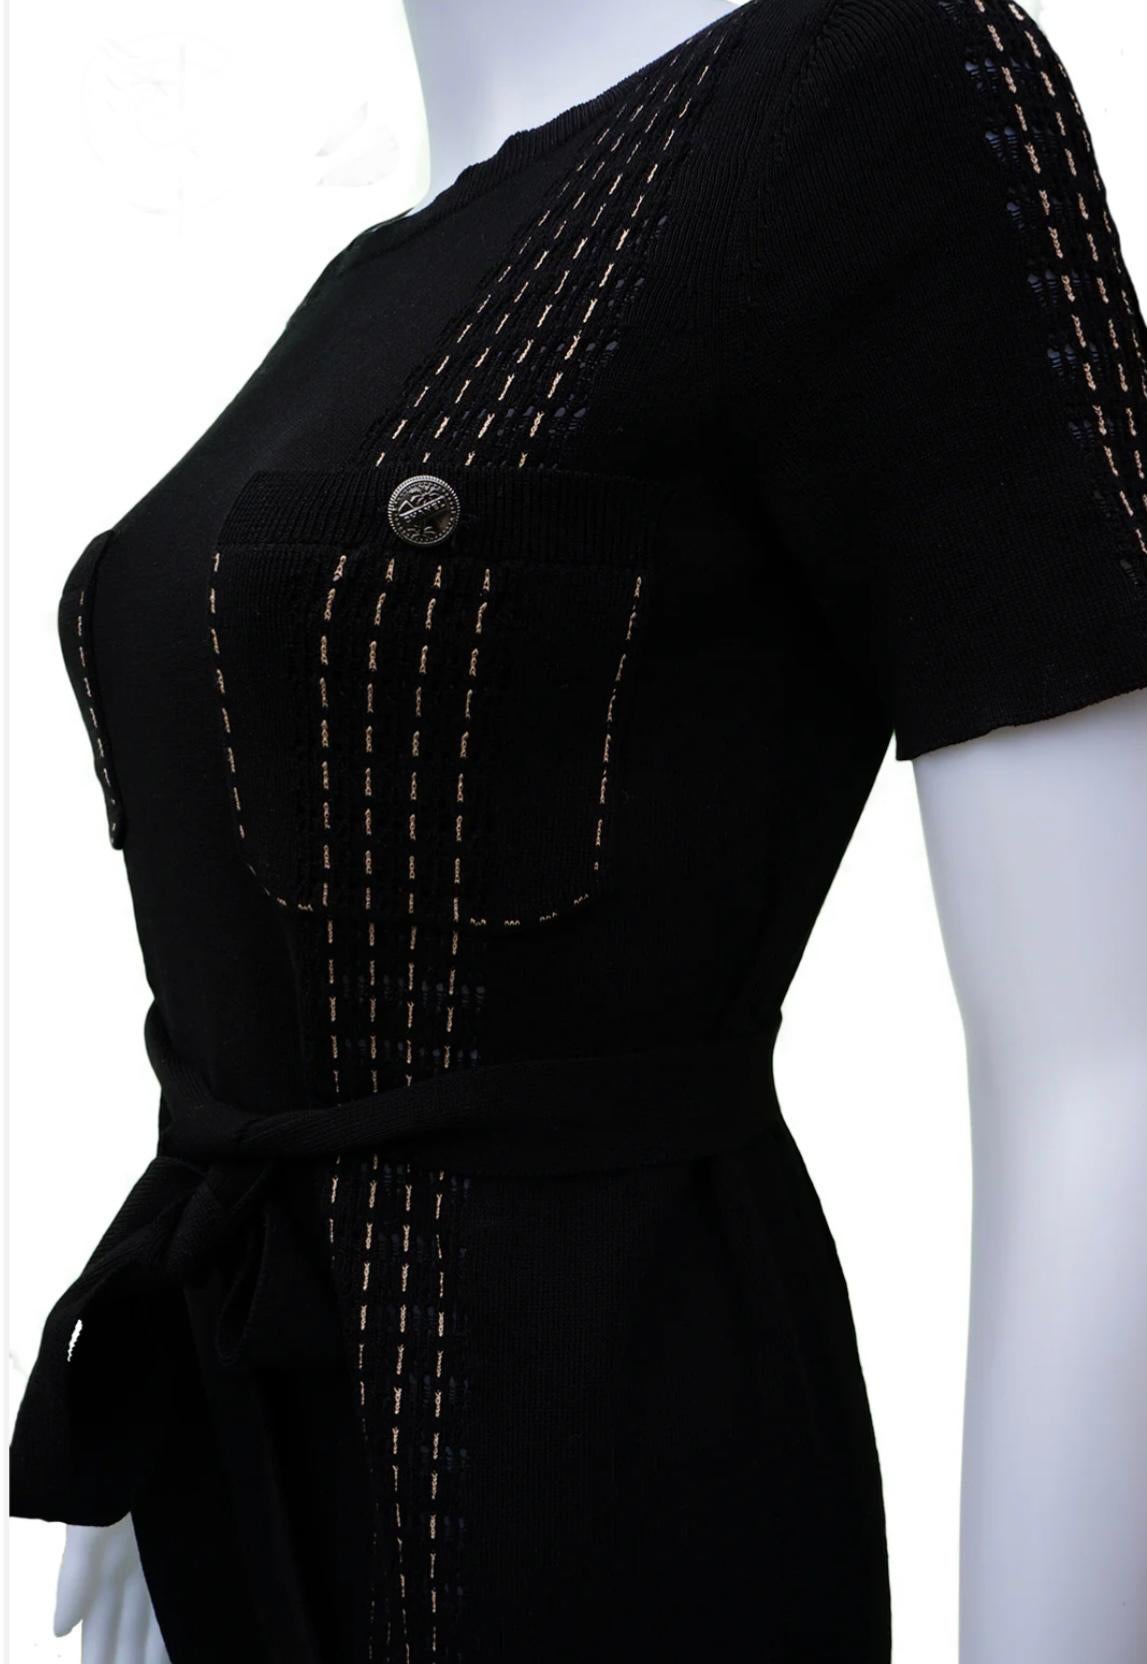 Fabulous Chanel little black dress with belt from 2017 Cruise Collection Paris/Cuba
-CC Logo buttons with palms 
Size mark 40 FR, condition is pristine.